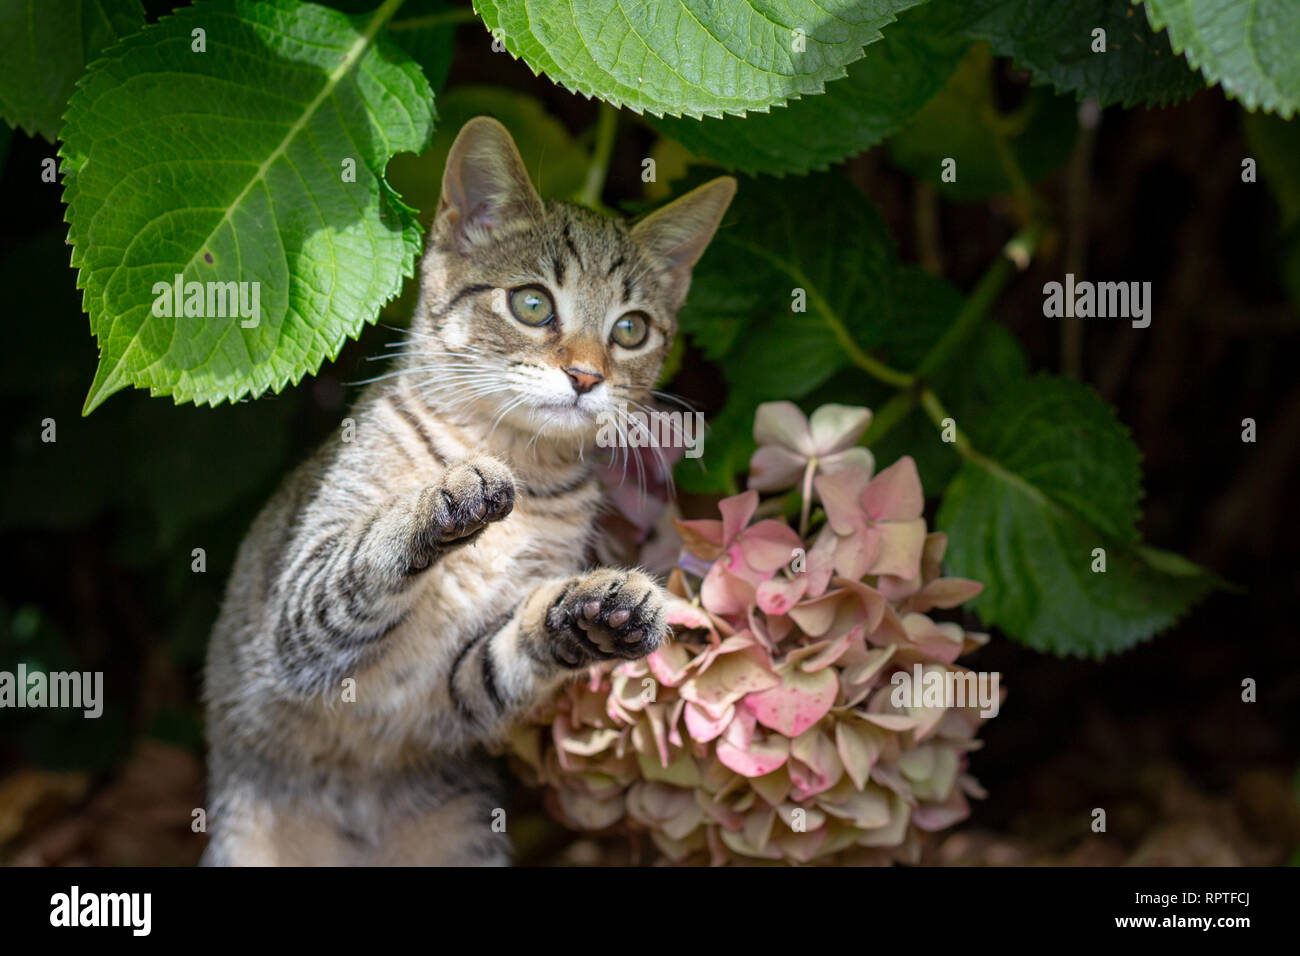 A tabby kitten plays under hydrangea bushes pretending to attack and pounce Stock Photo